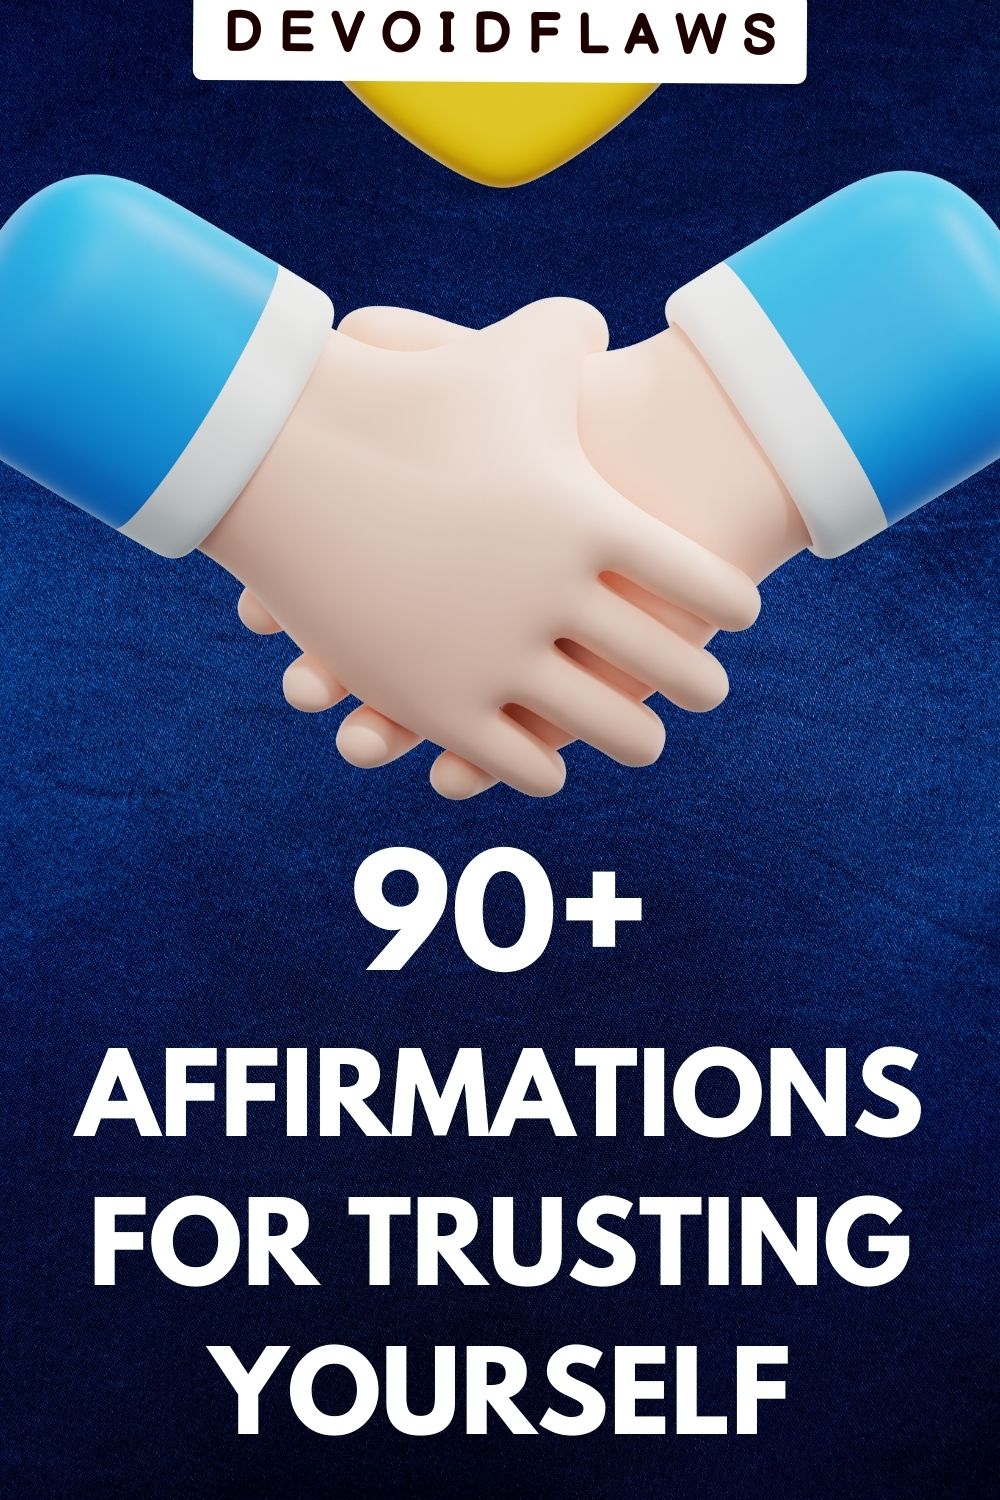 image with text - 90+ affirmations for trusting yourself